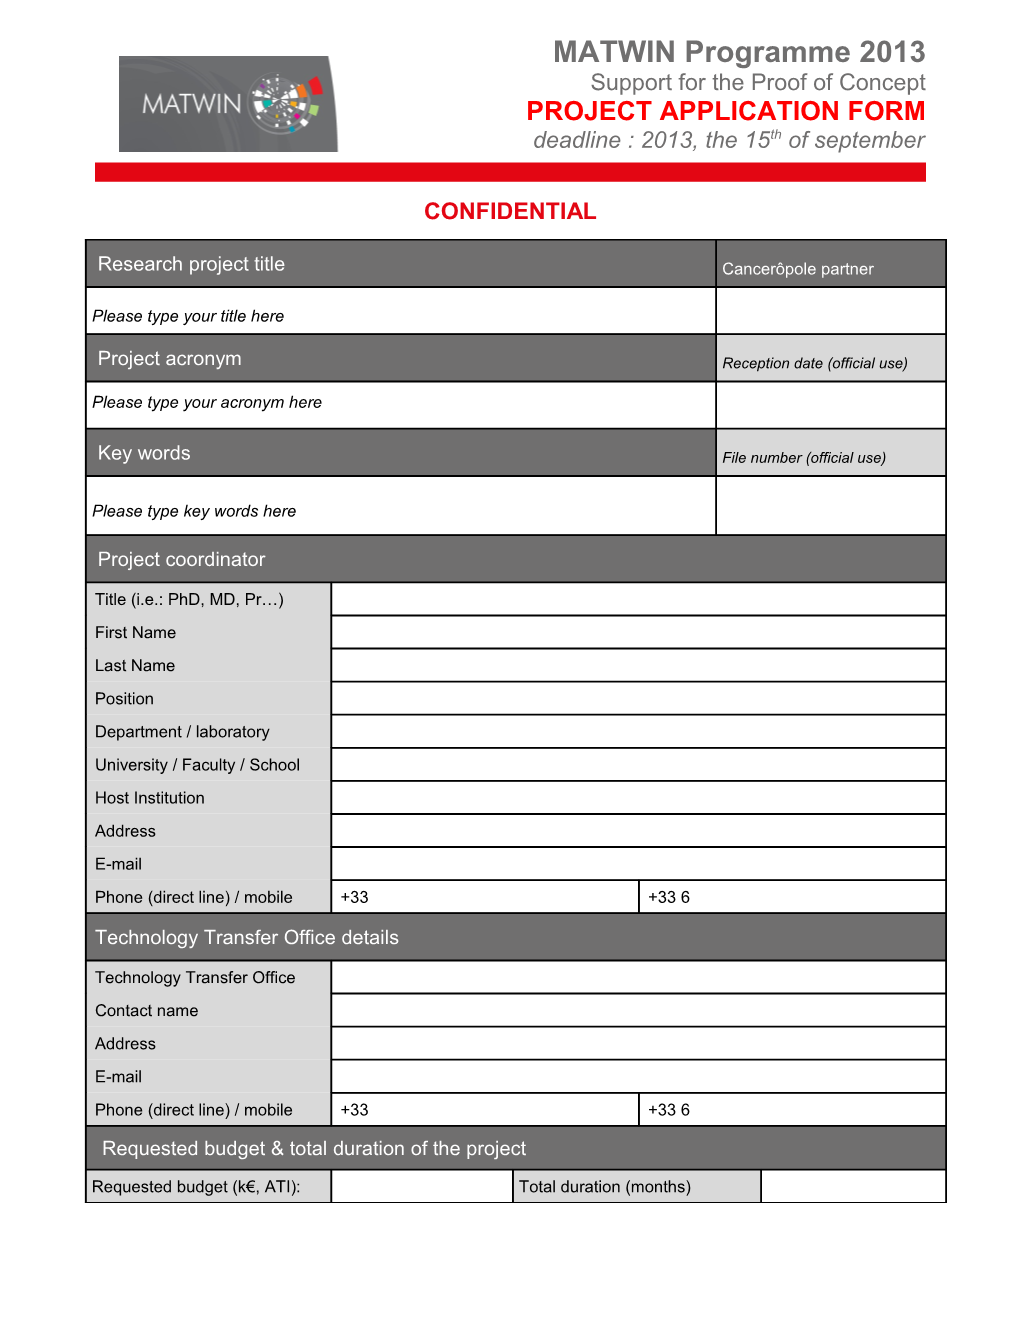 MATWIN 2013CONFIDENTIAL Project Application Form